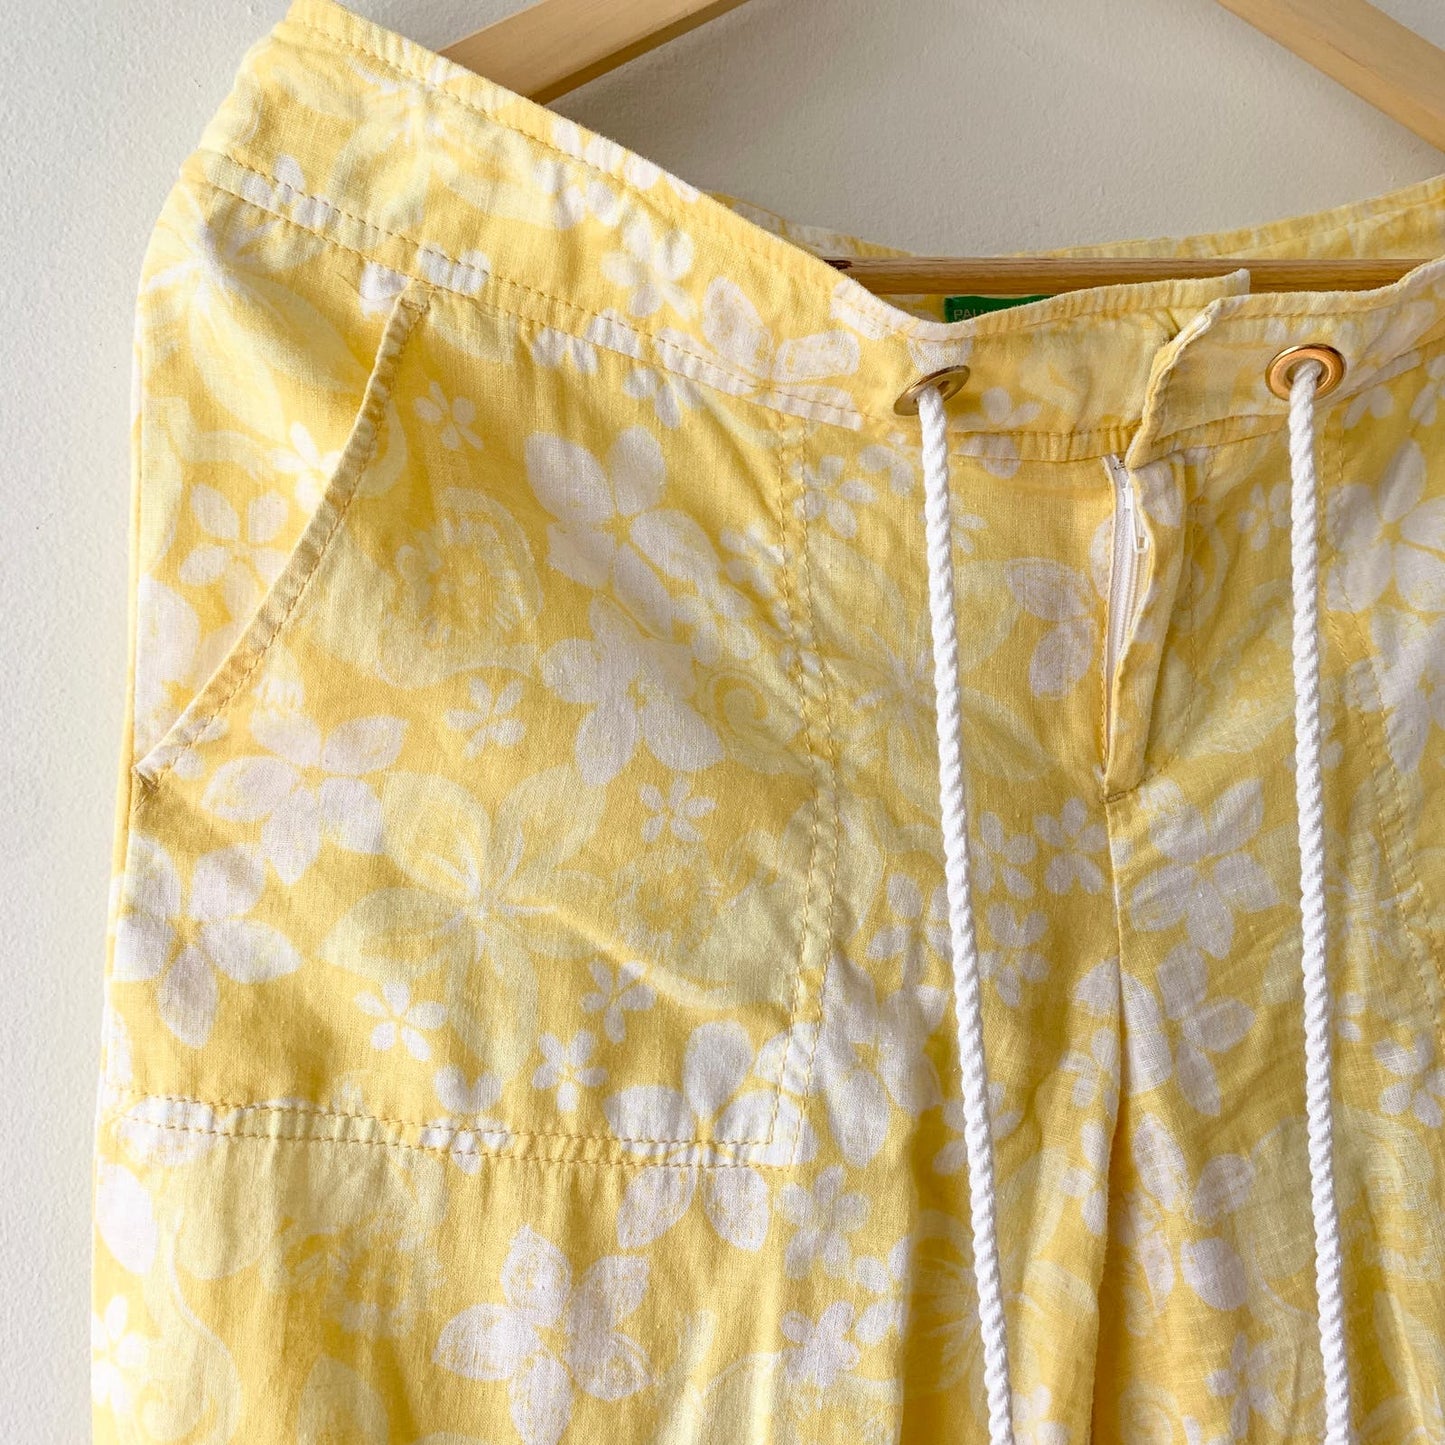 LILLY PULITZER Palm Beach Fit Linen Yellow Floral Wide Leg Pants 6